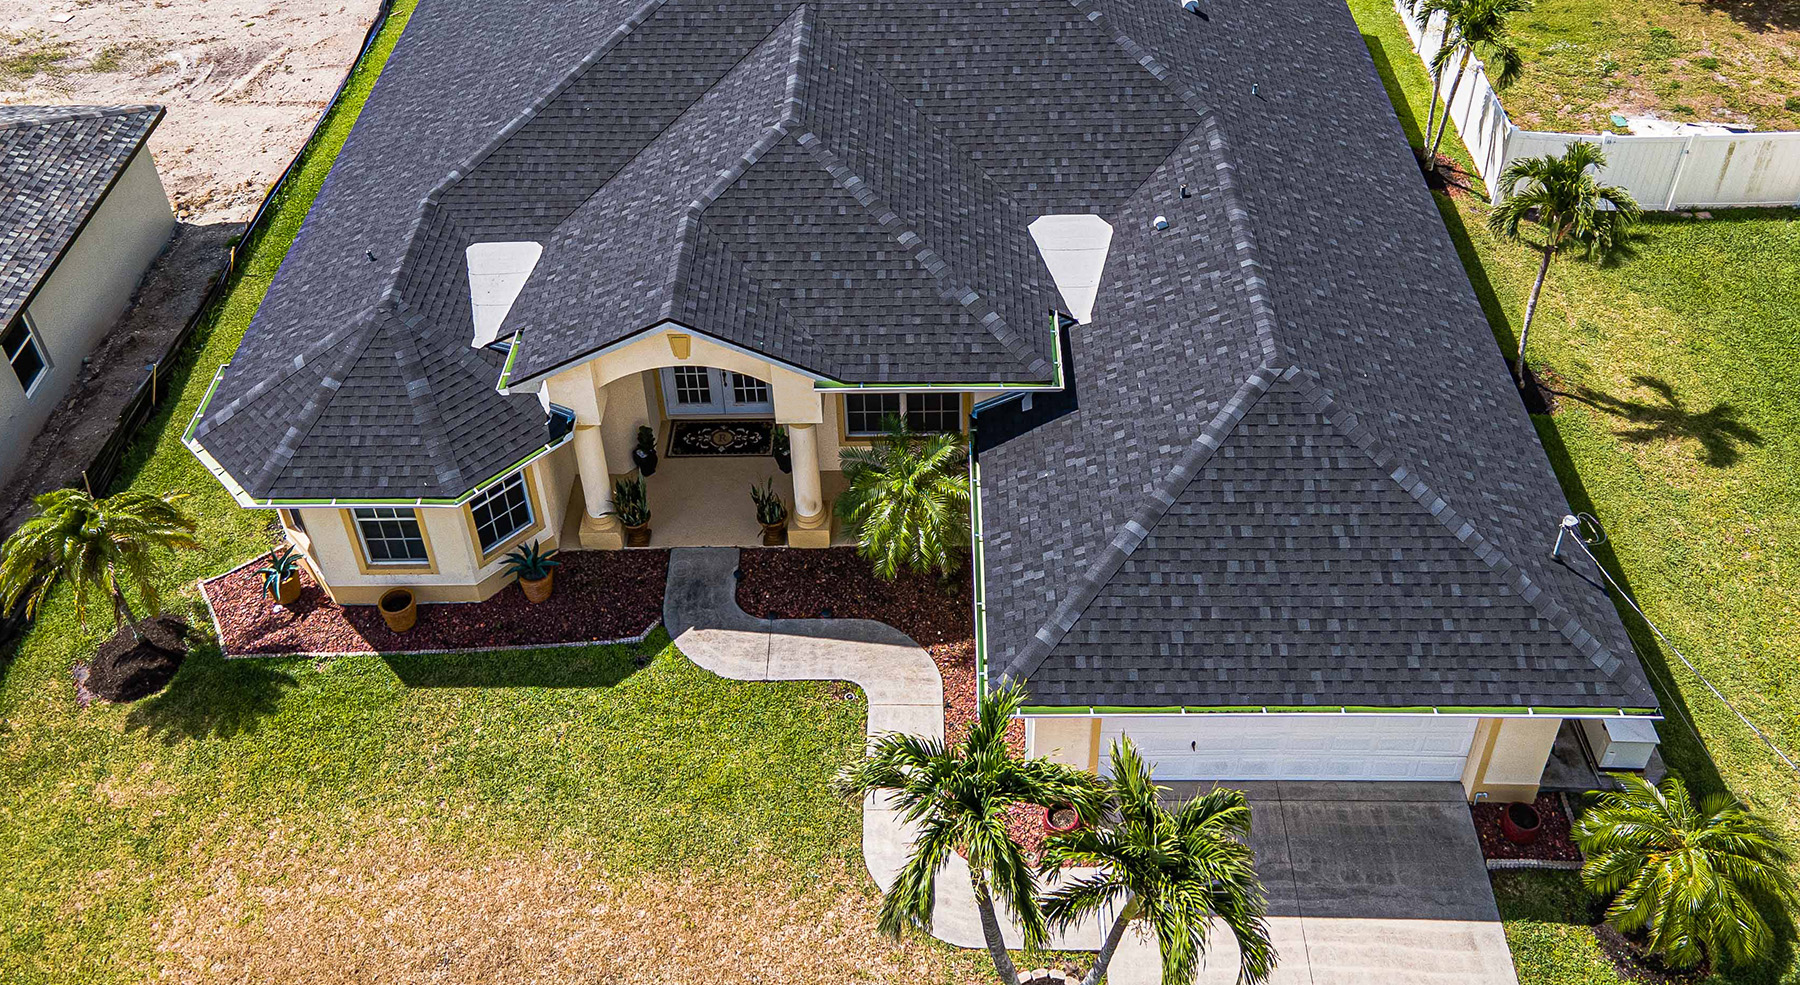 drone image of a residential single family home with dark gray asphlat shingle roof